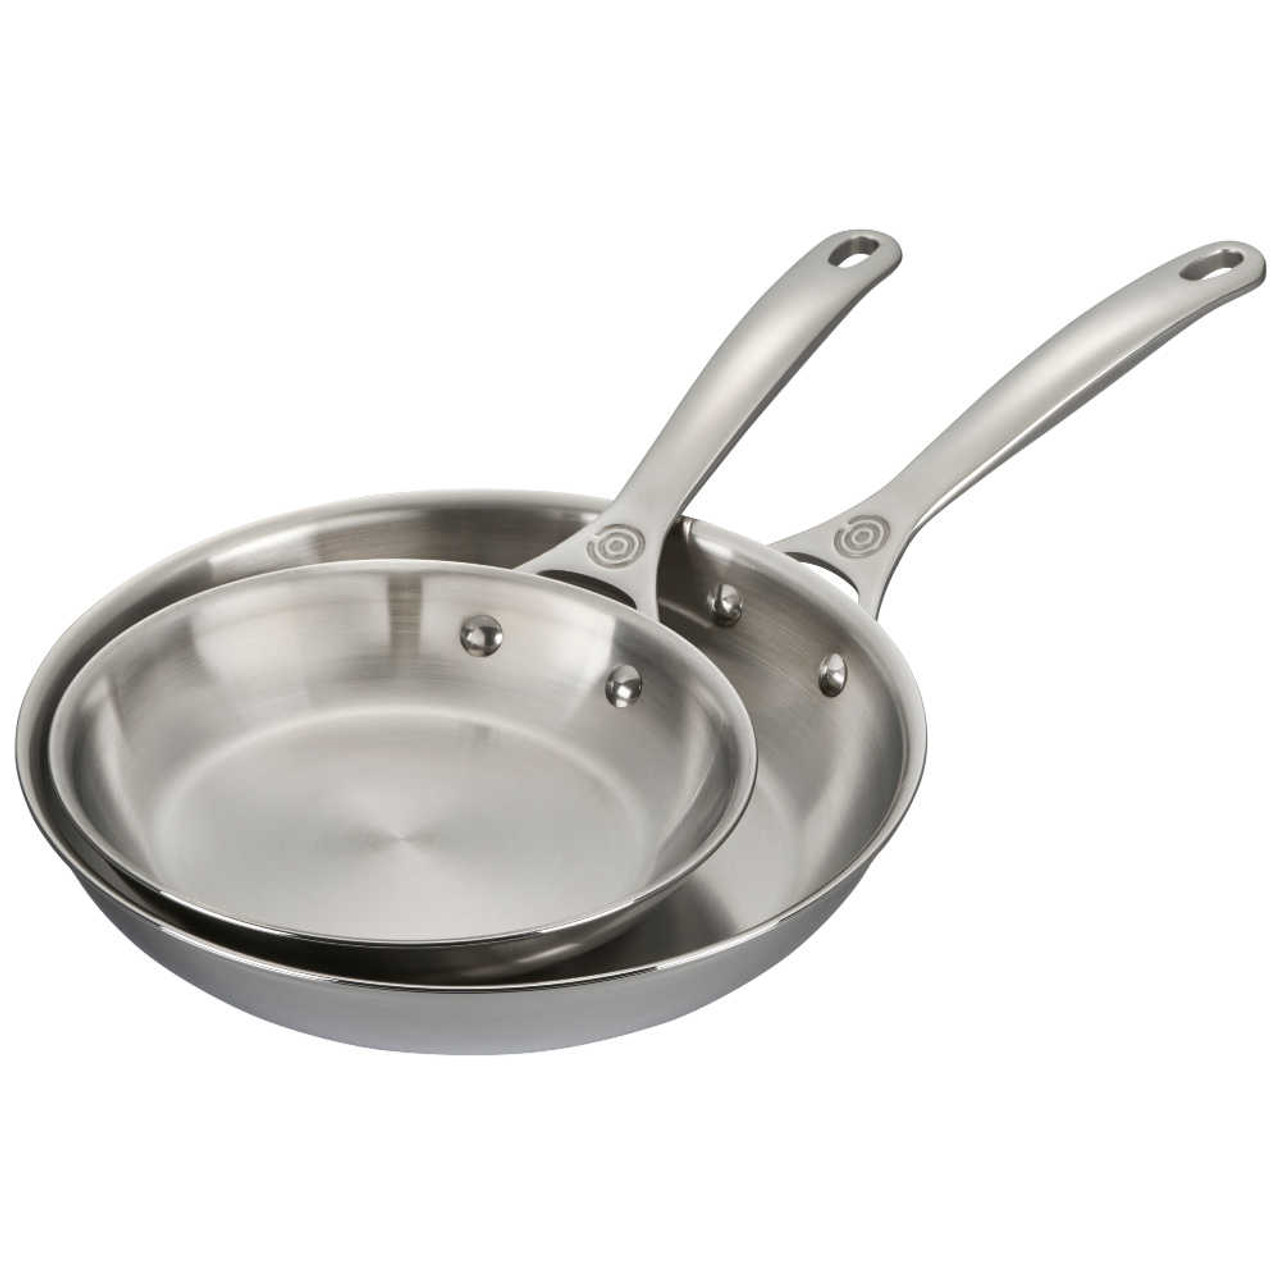 Le Creuset 10 Inch Stainless Steel Fry Pan with Glass Lid SS Knob Kit